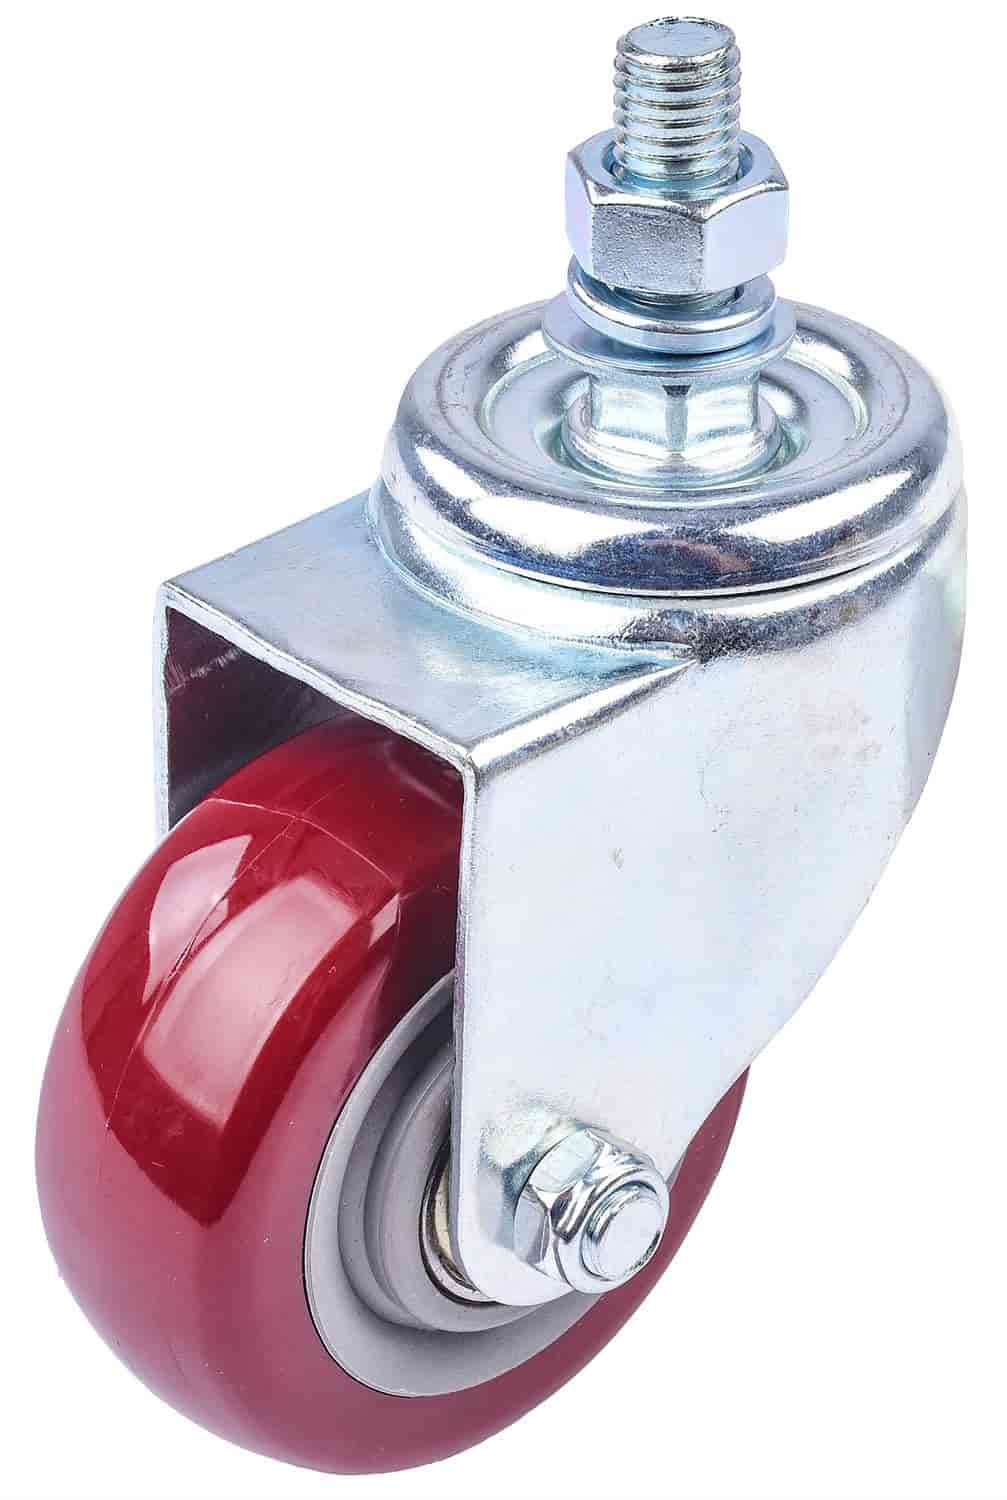 Replacement Swivel Caster for Two-Piece Engine Storage Stand